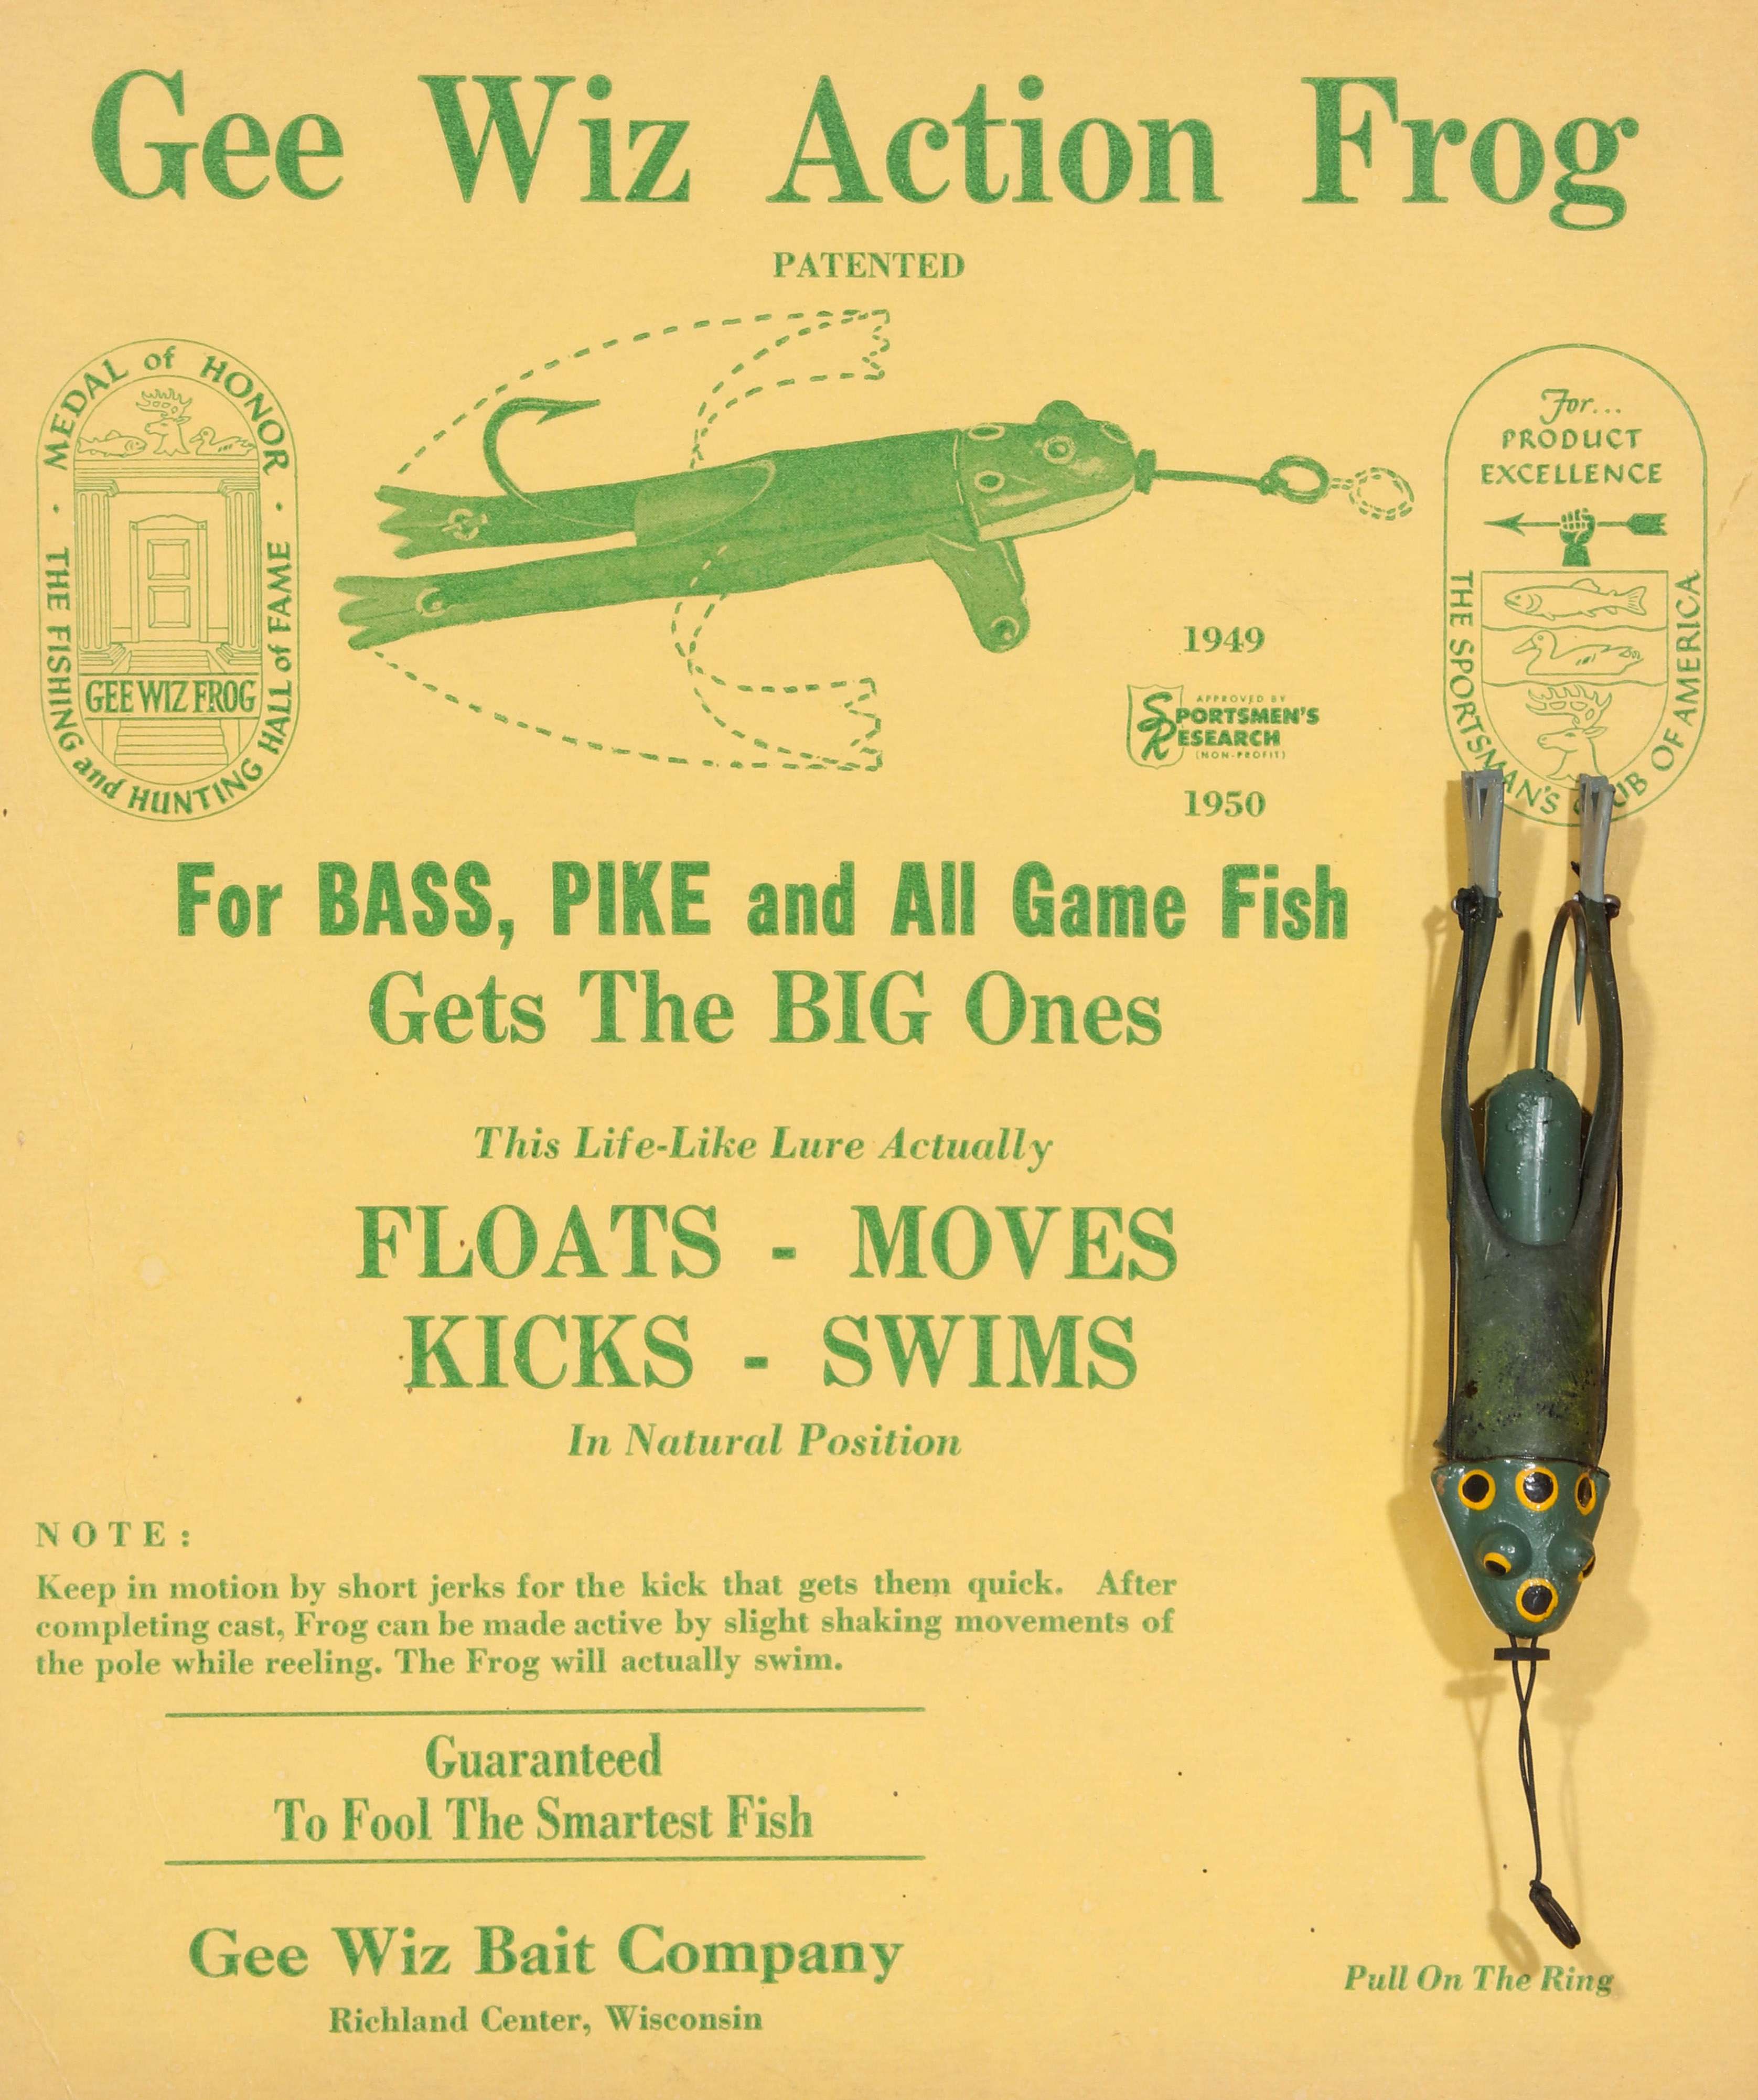 THE GEE WIZ ACTION FROG LURE AND STORE DISPLAY